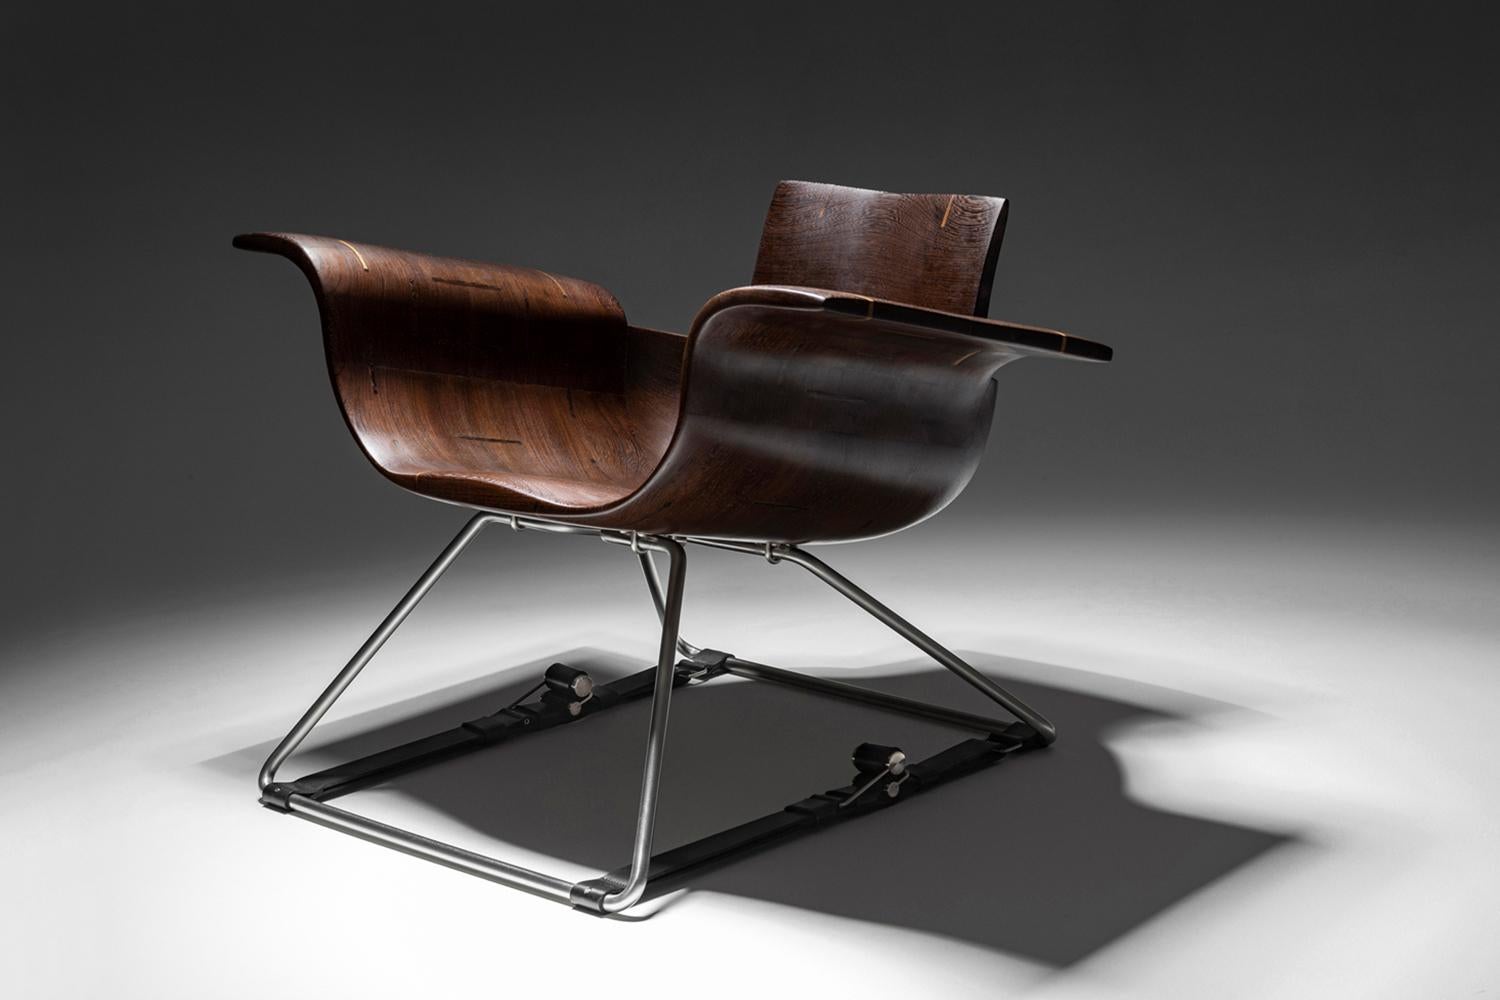 Polish Roadster Armchair with Footstool made out of Wenge Wood. Handcrafted in Poland. For Sale